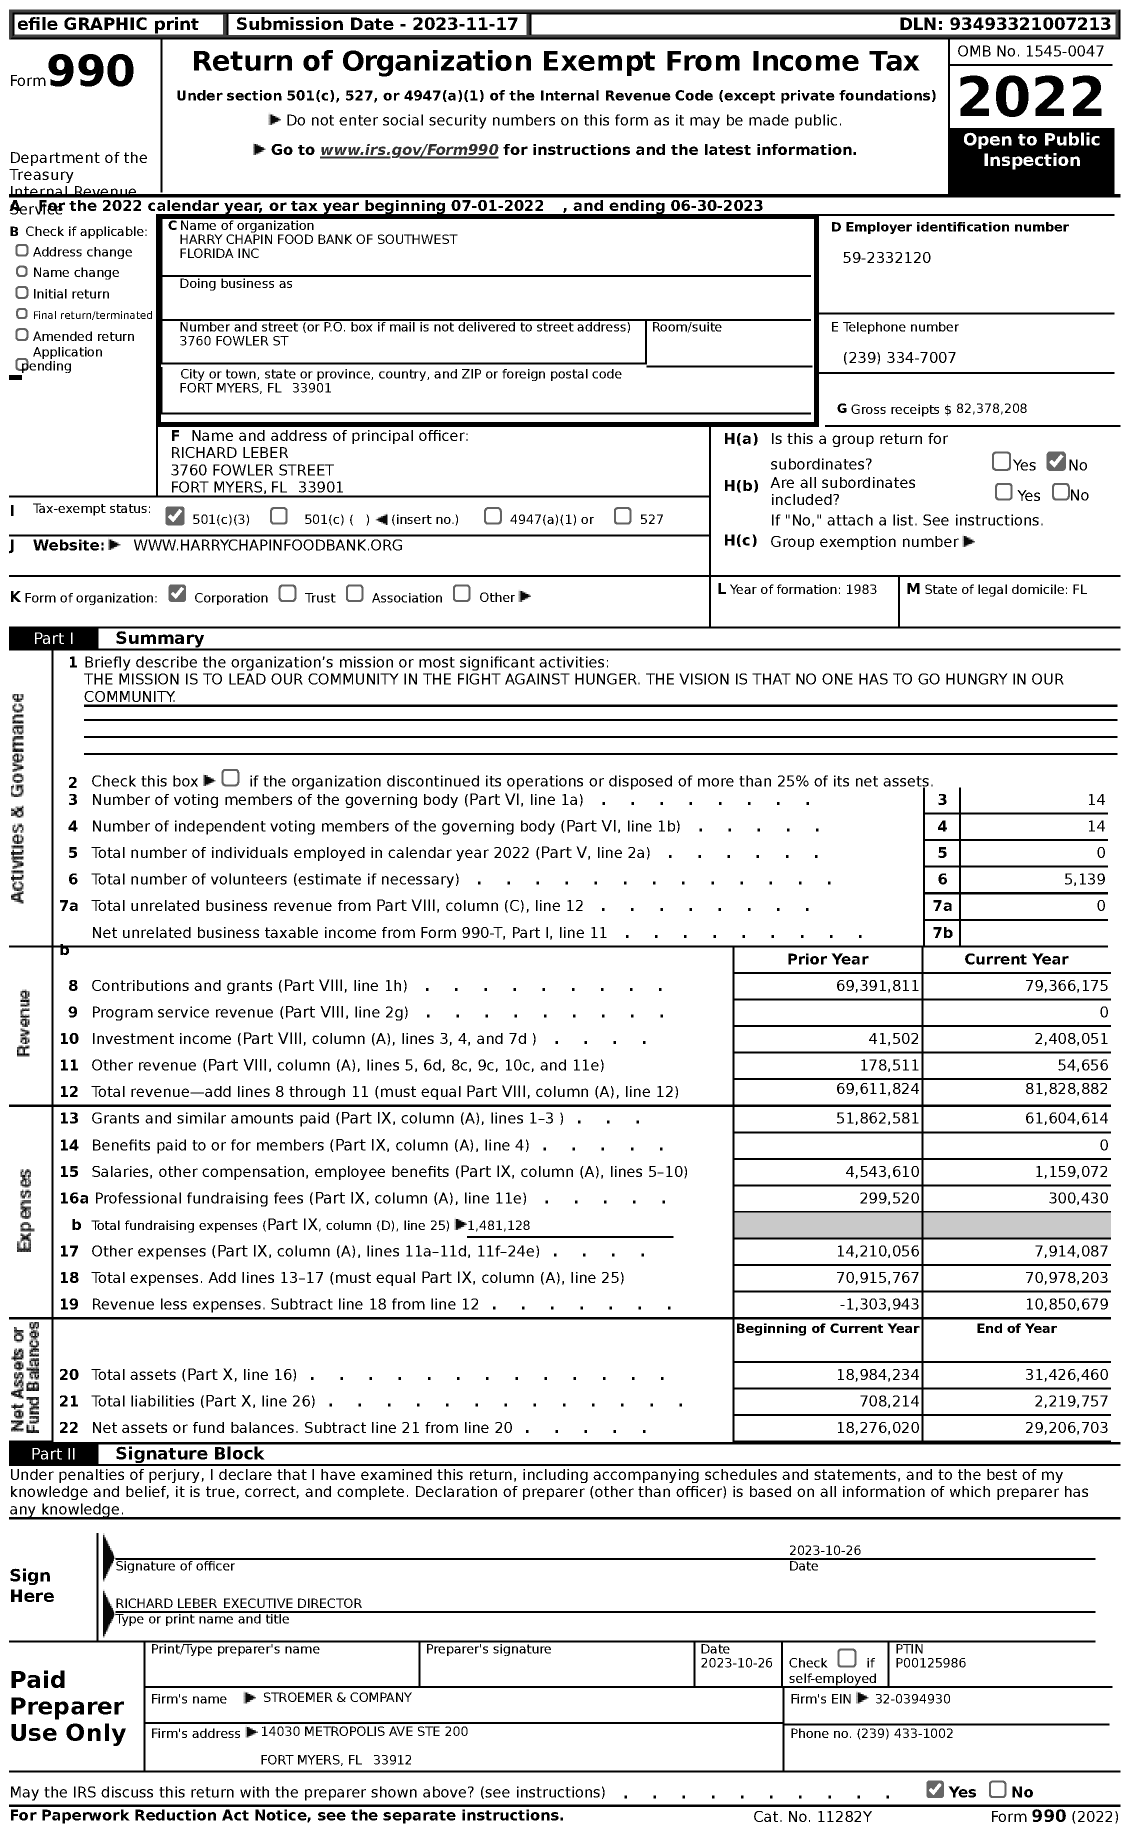 Image of first page of 2022 Form 990 for Harry Chapin Food Bank of Southwest Florida